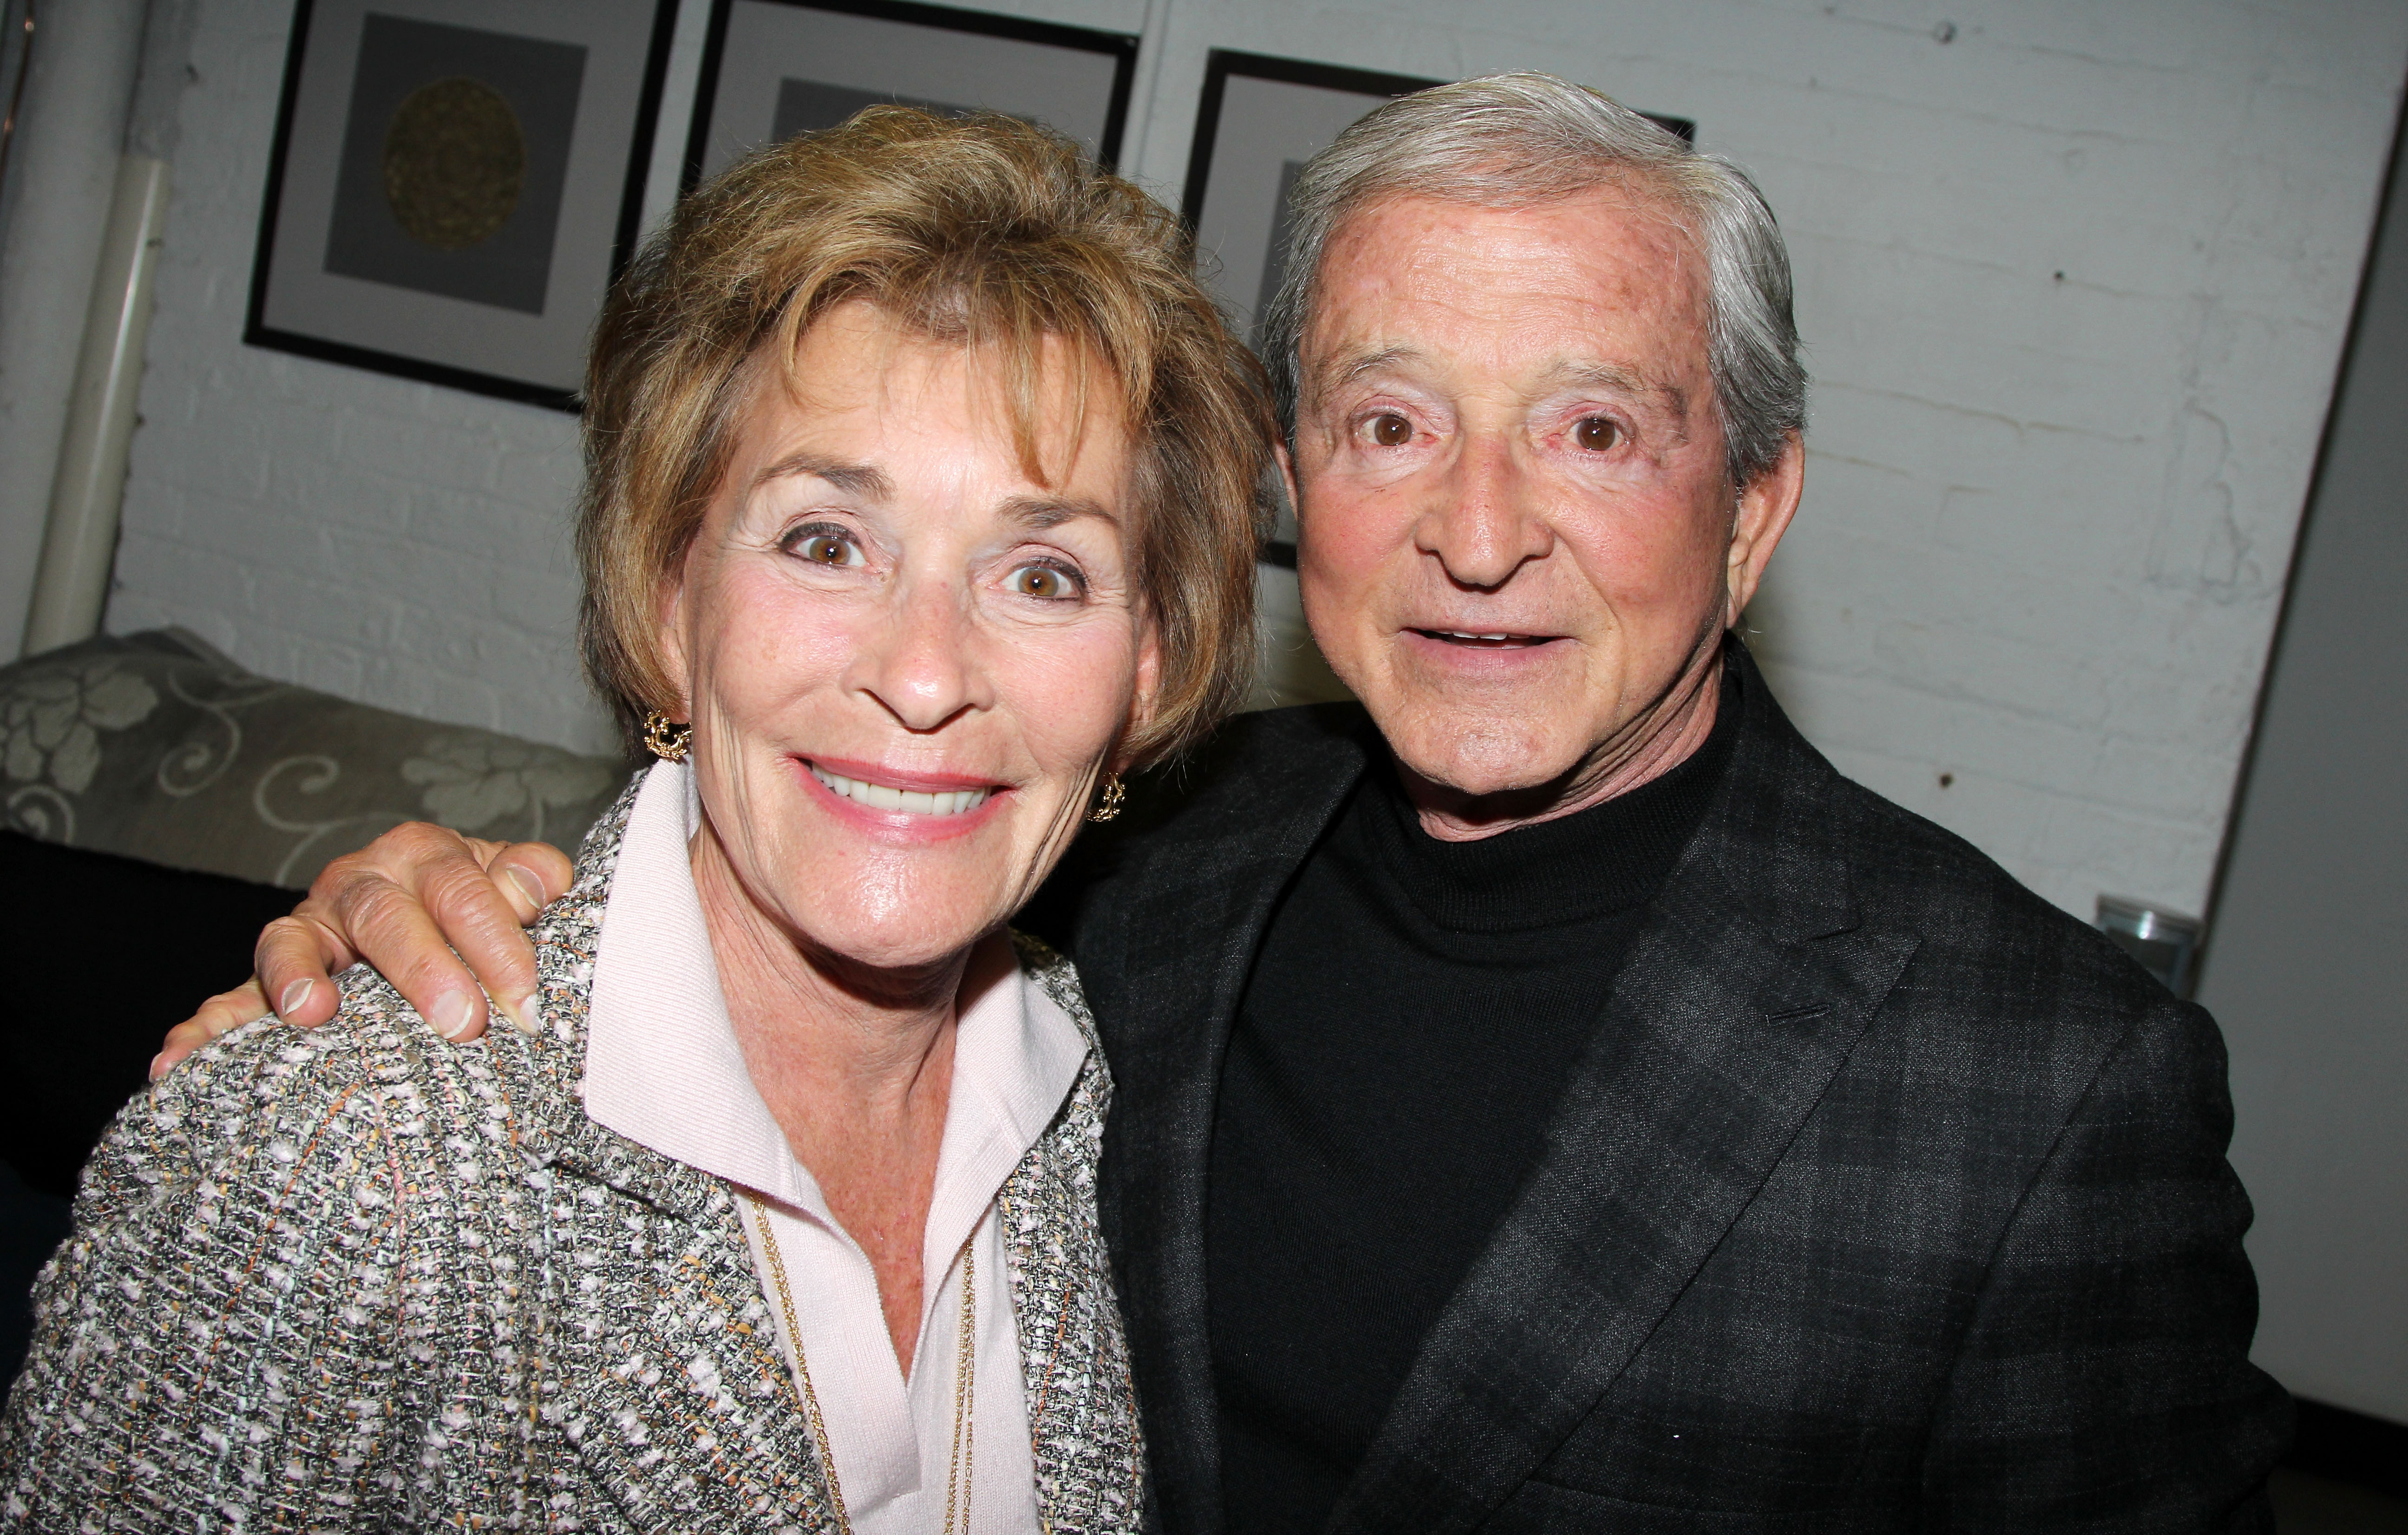 Judge Judy Sheindlin and her husband, Judge Jerry Sheindlin, backstage at the Broadway hit "The Performers" on November 10, 2012, in New York City | Source: Getty Images